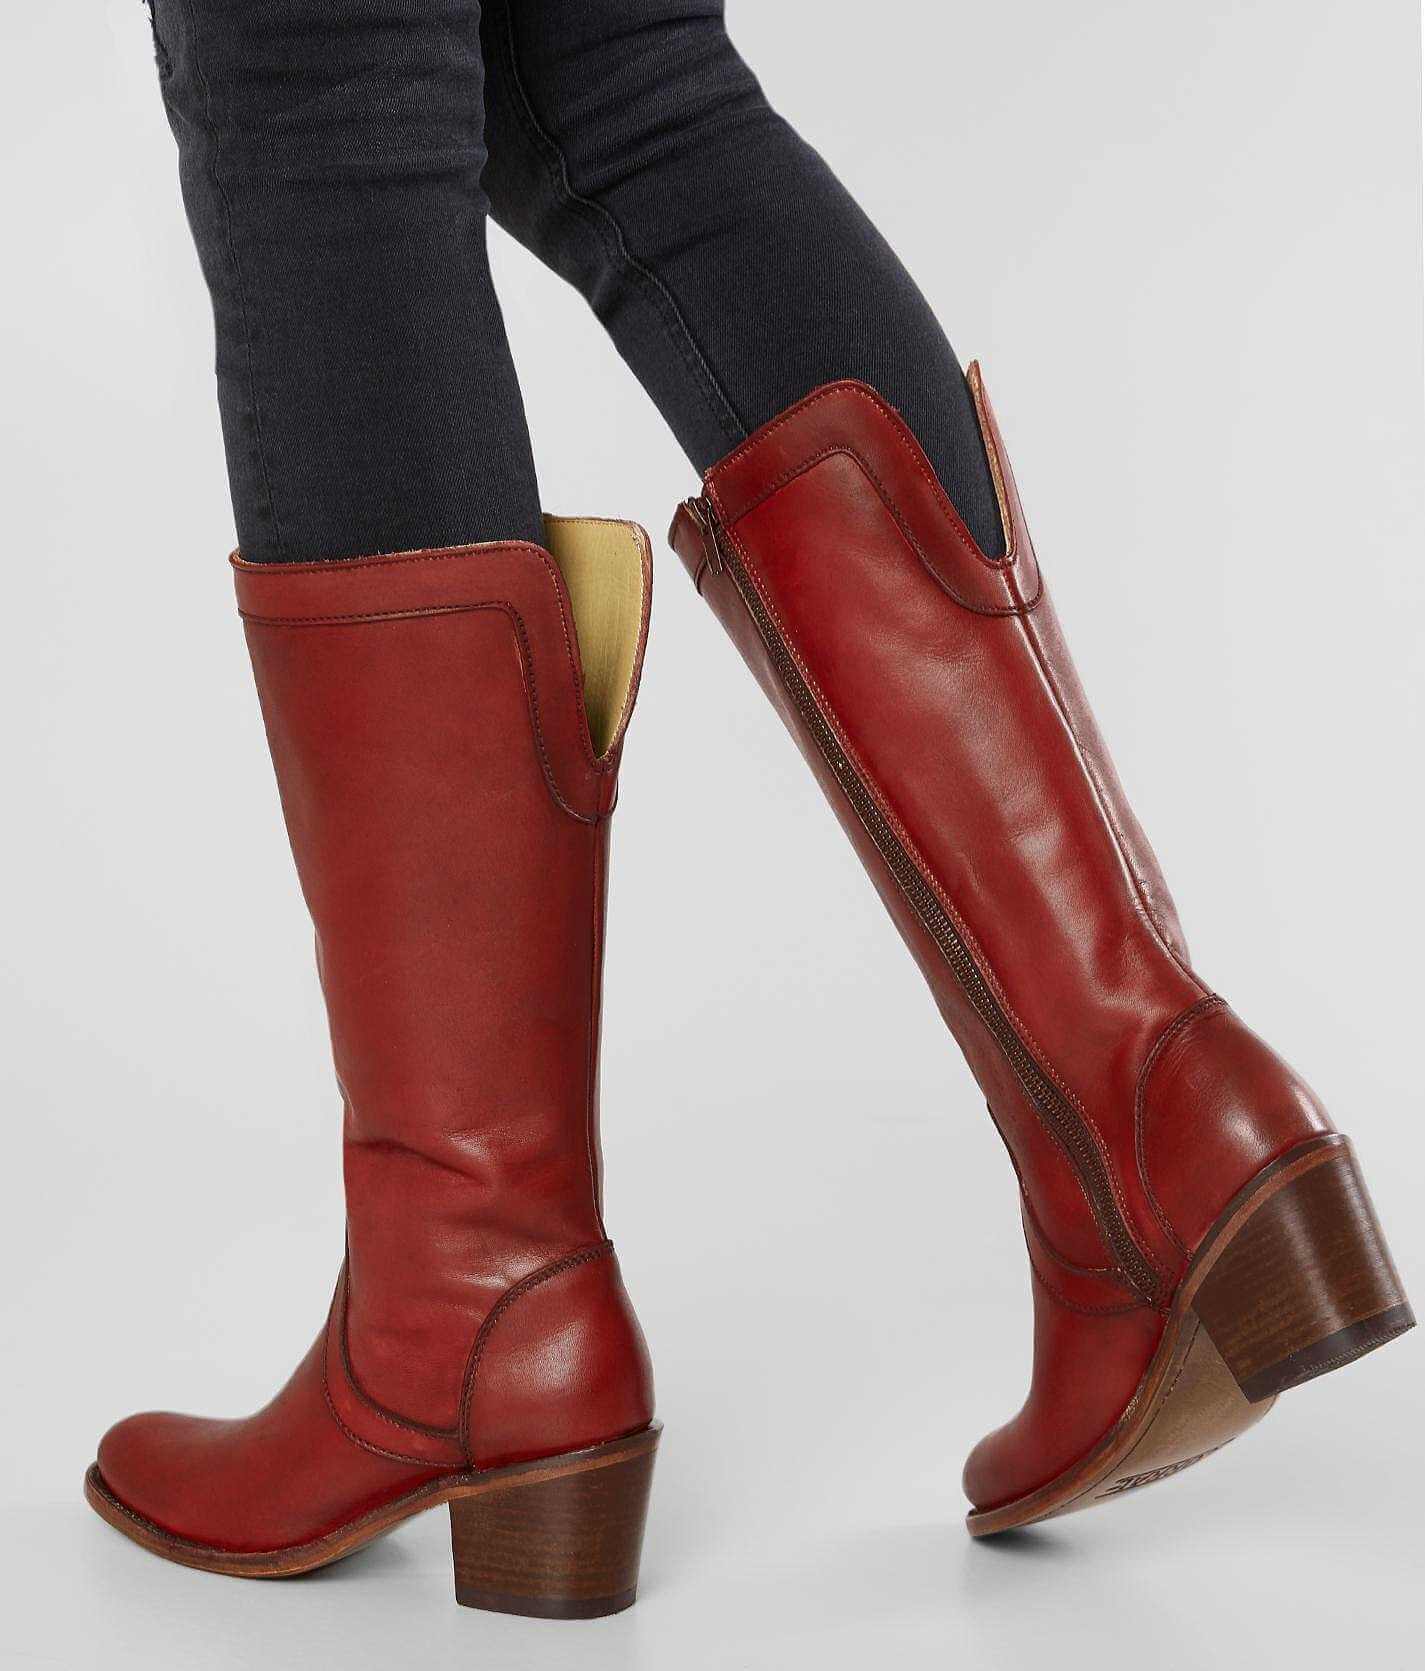 womens tan leather riding boots